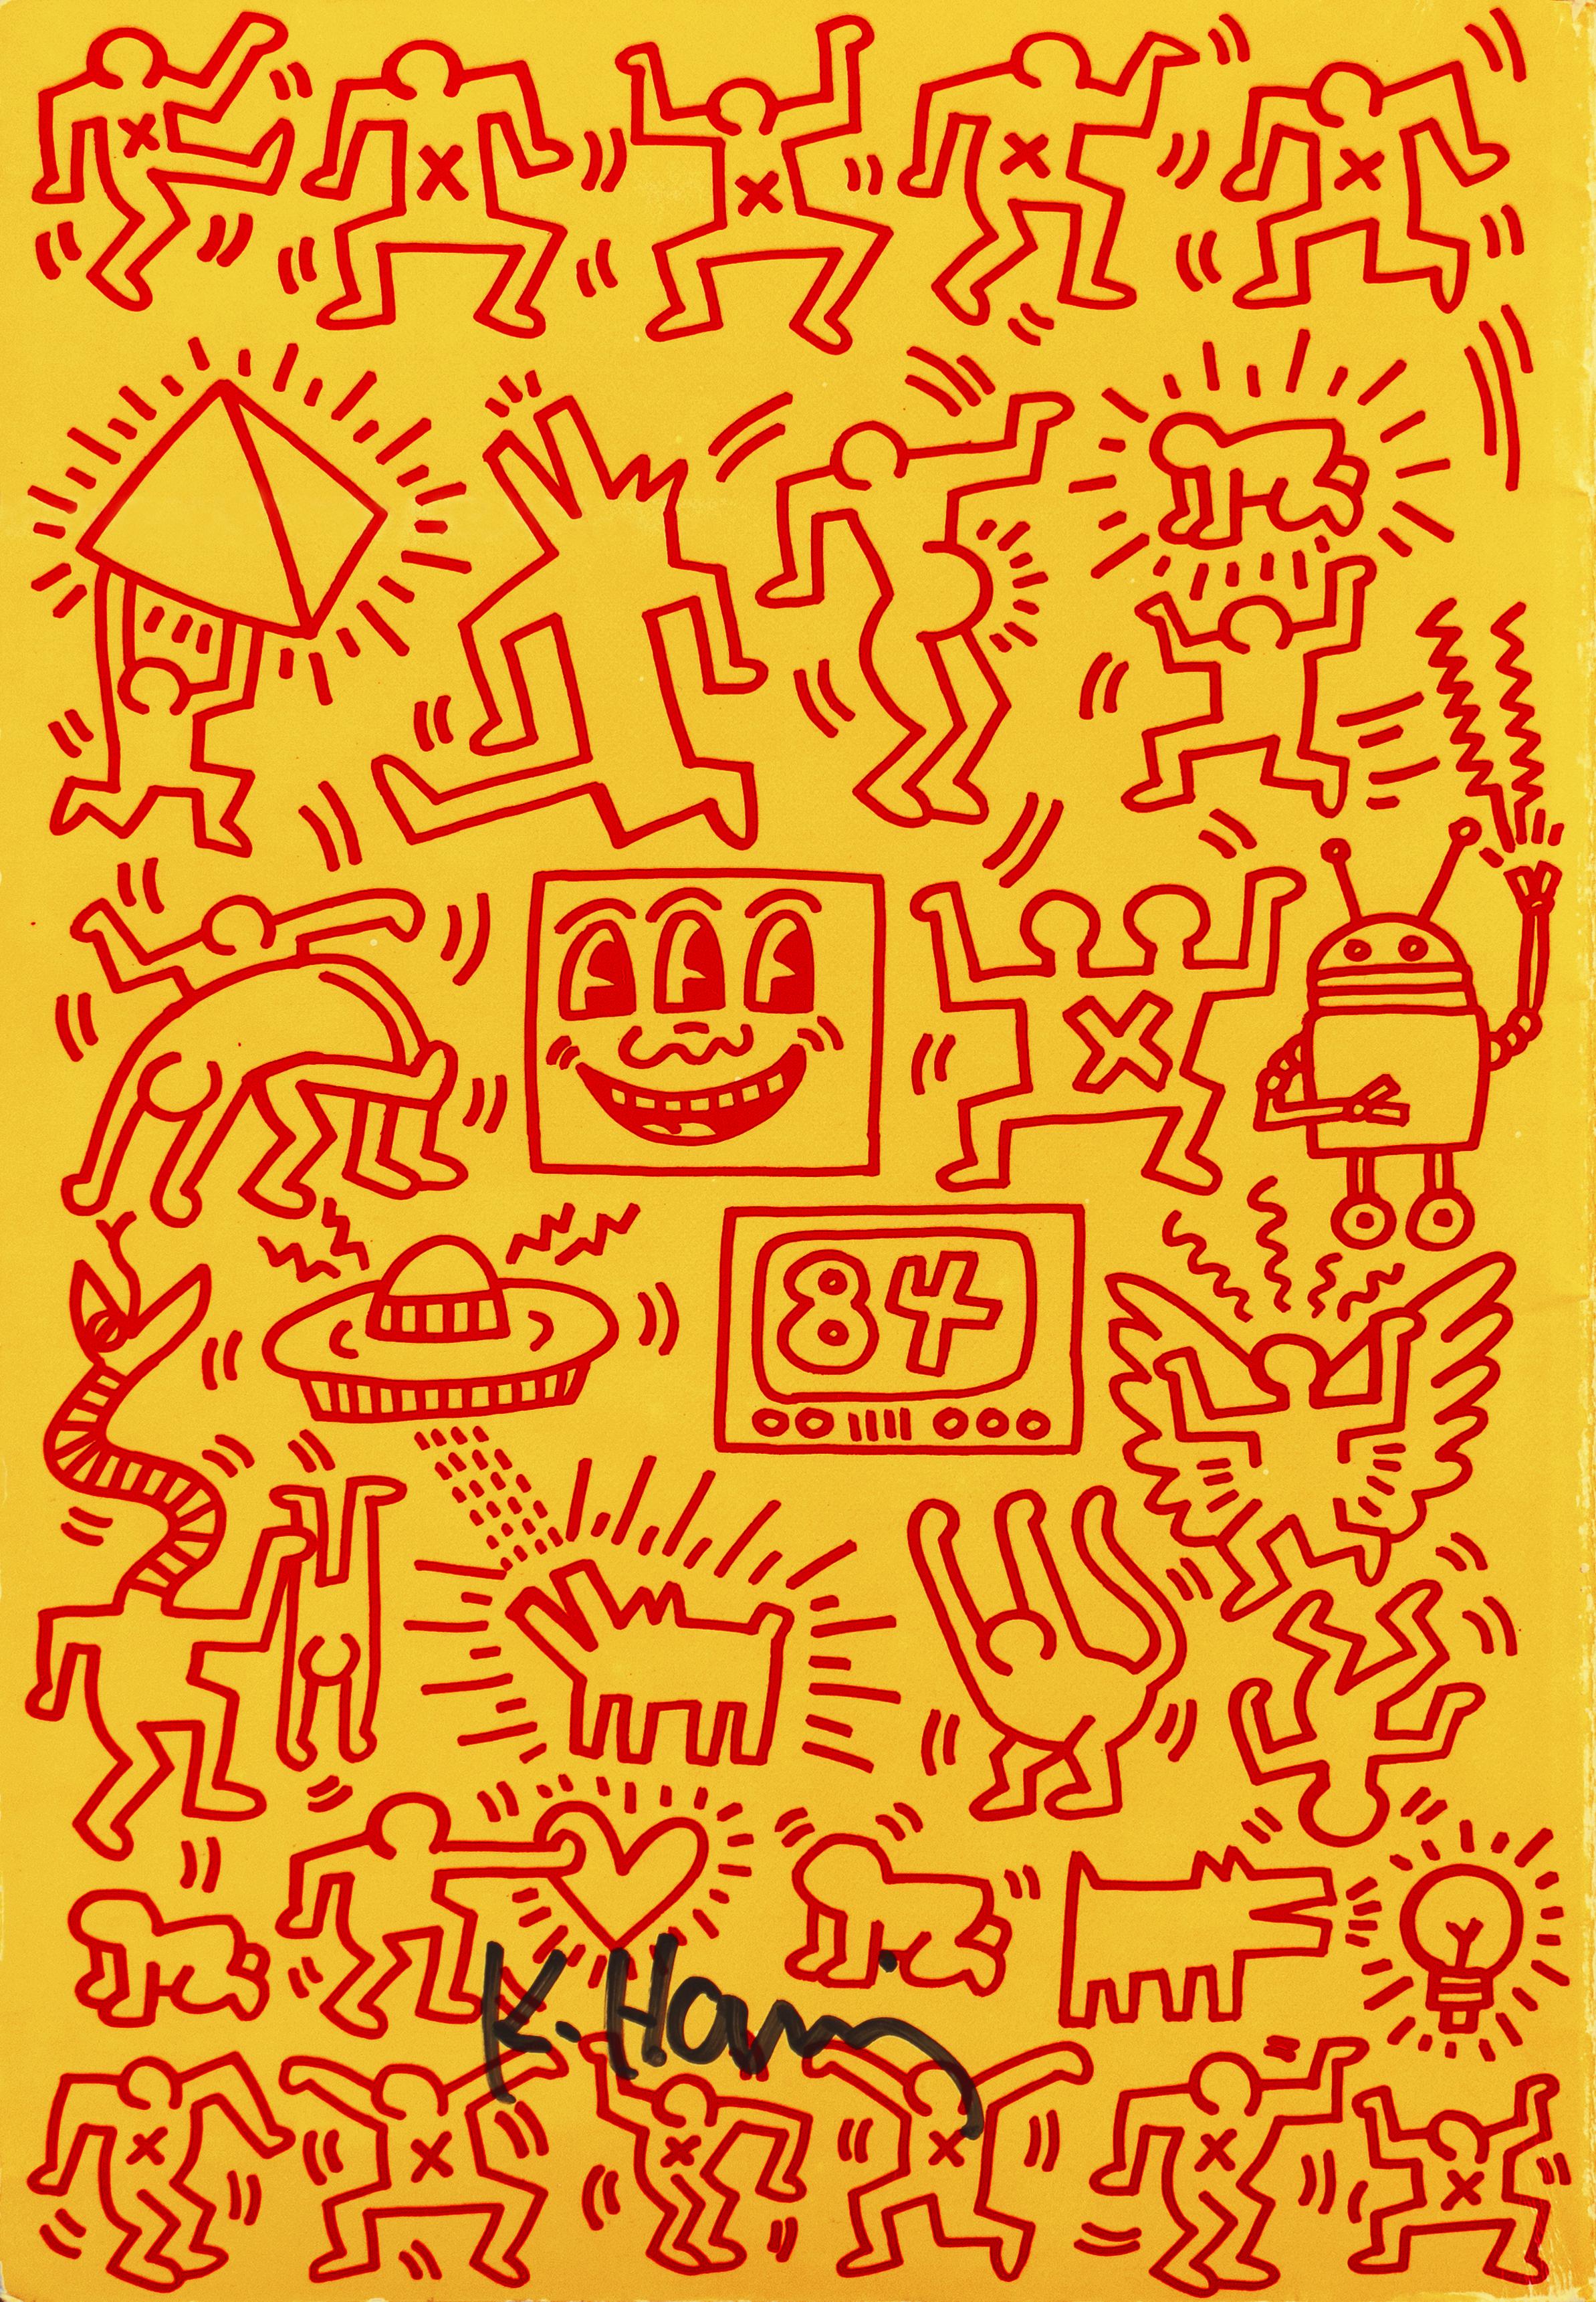 'Art in Transit', Hand Signed by Haring, Subway Drawings, New York, Pop Art - Print by Keith Haring